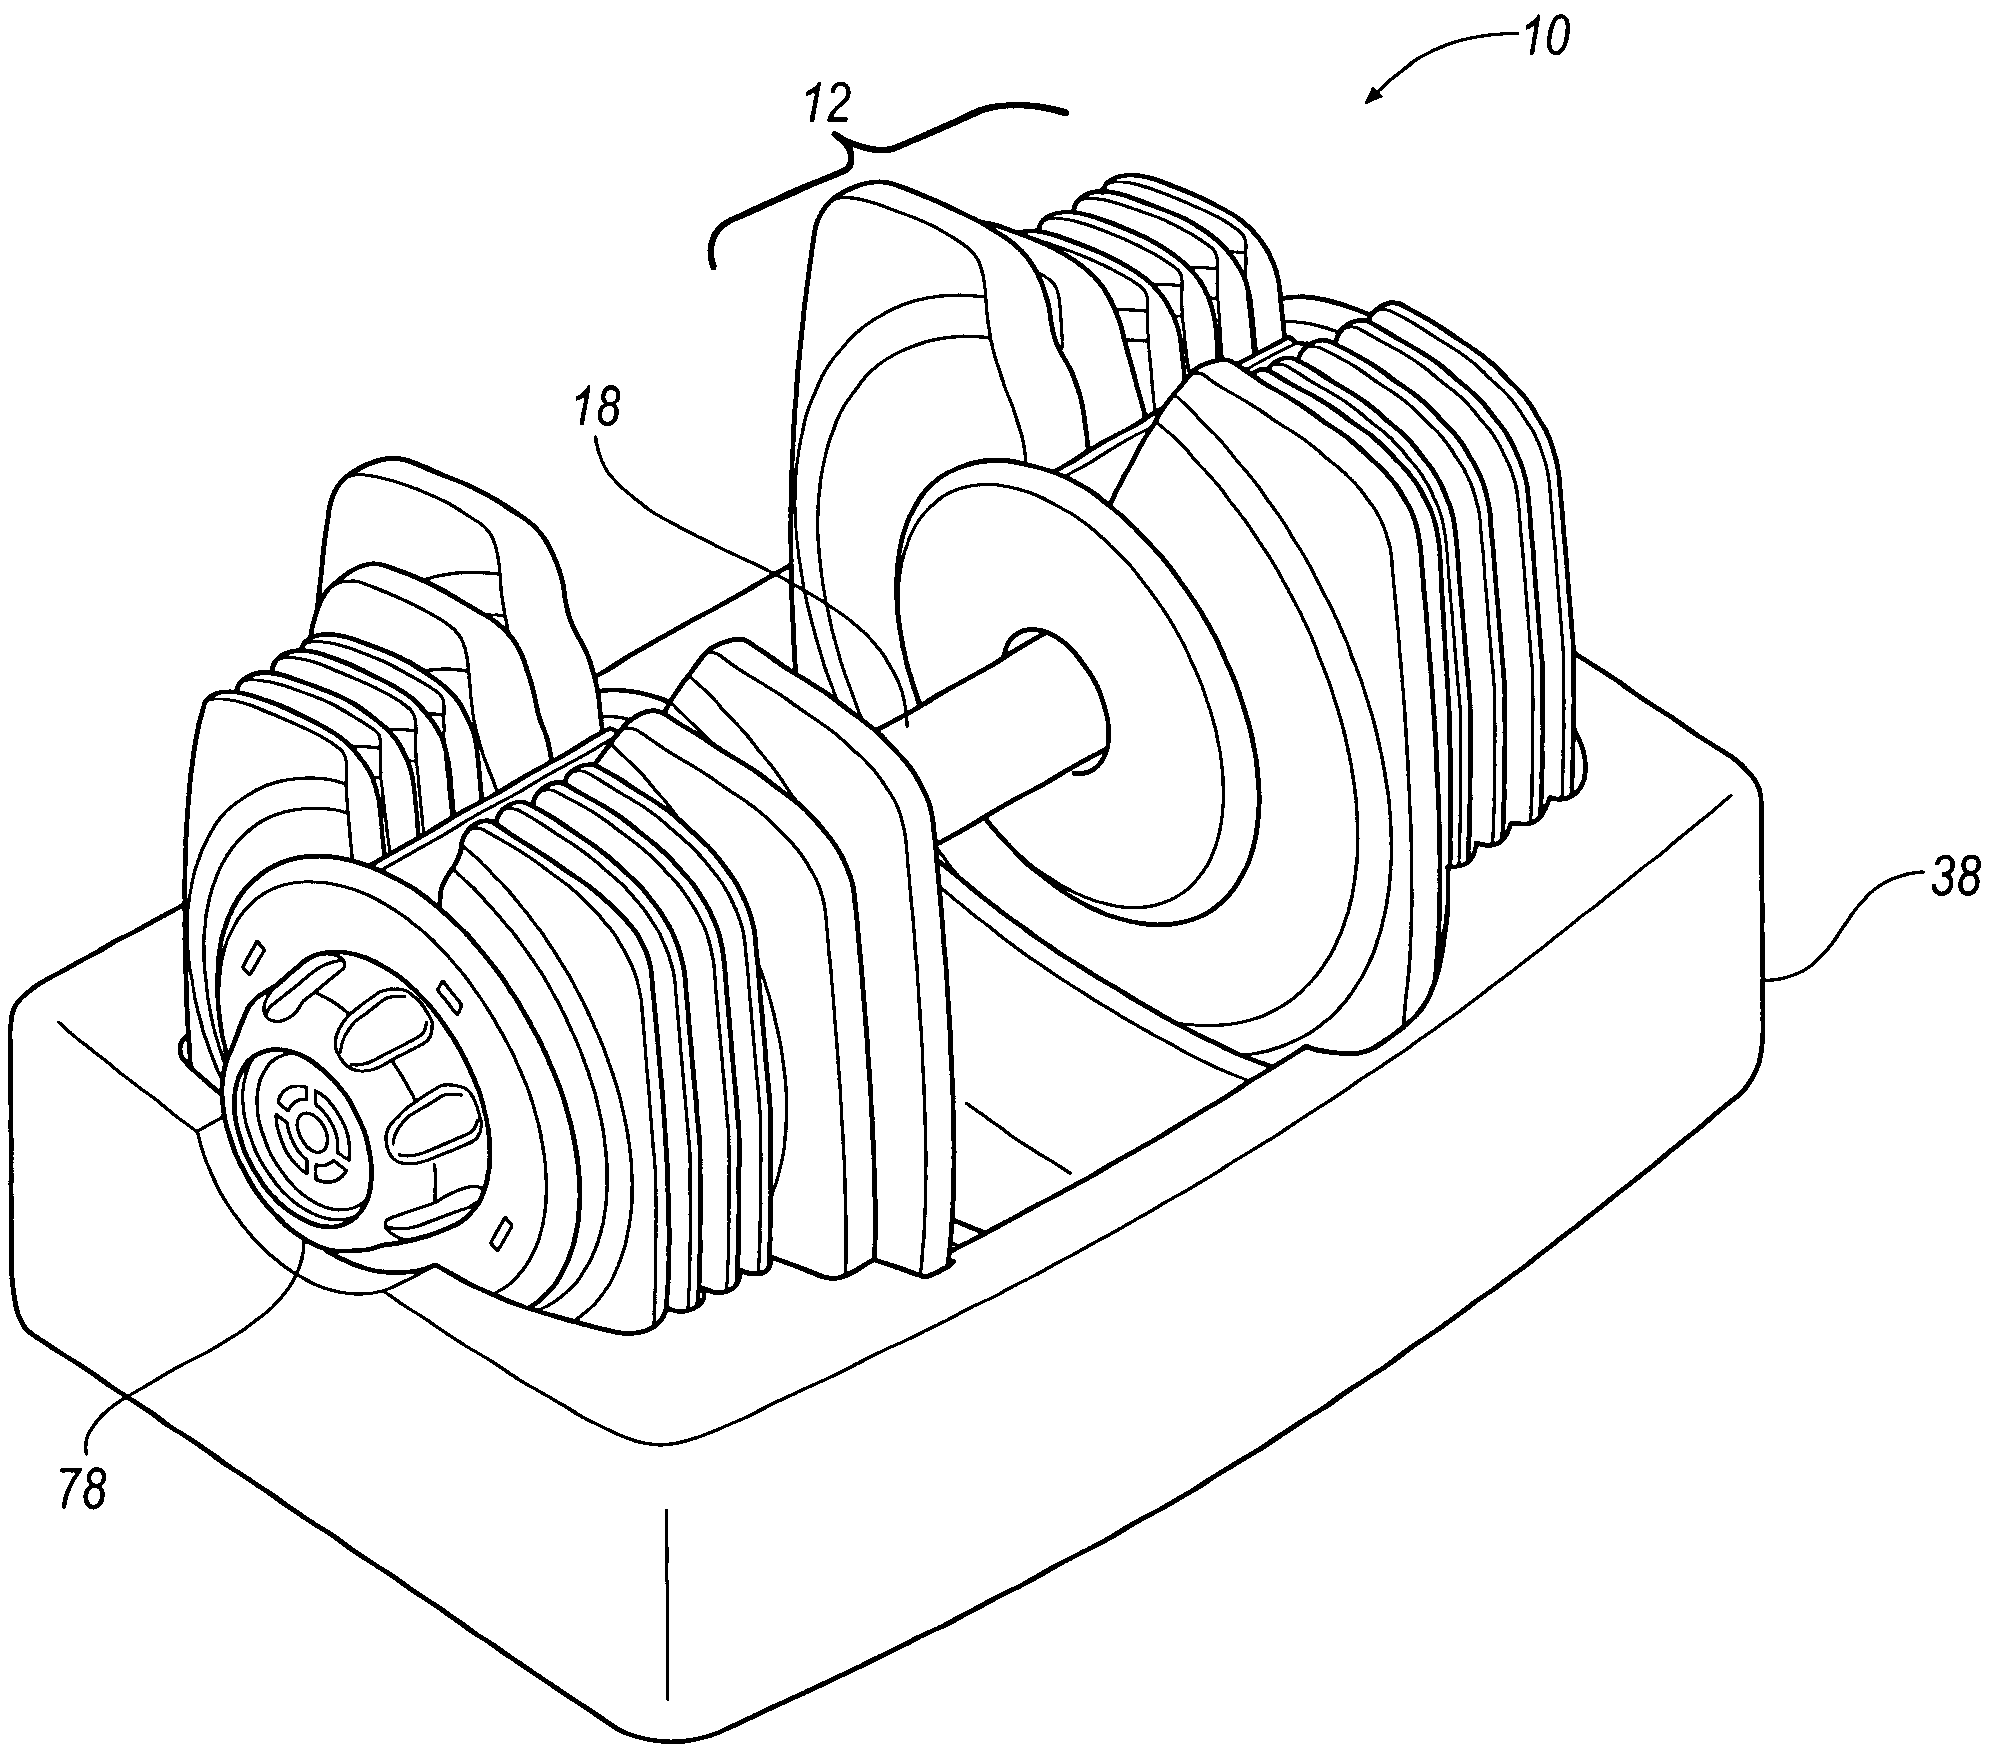 Weight-training apparatus having selectable weight plates